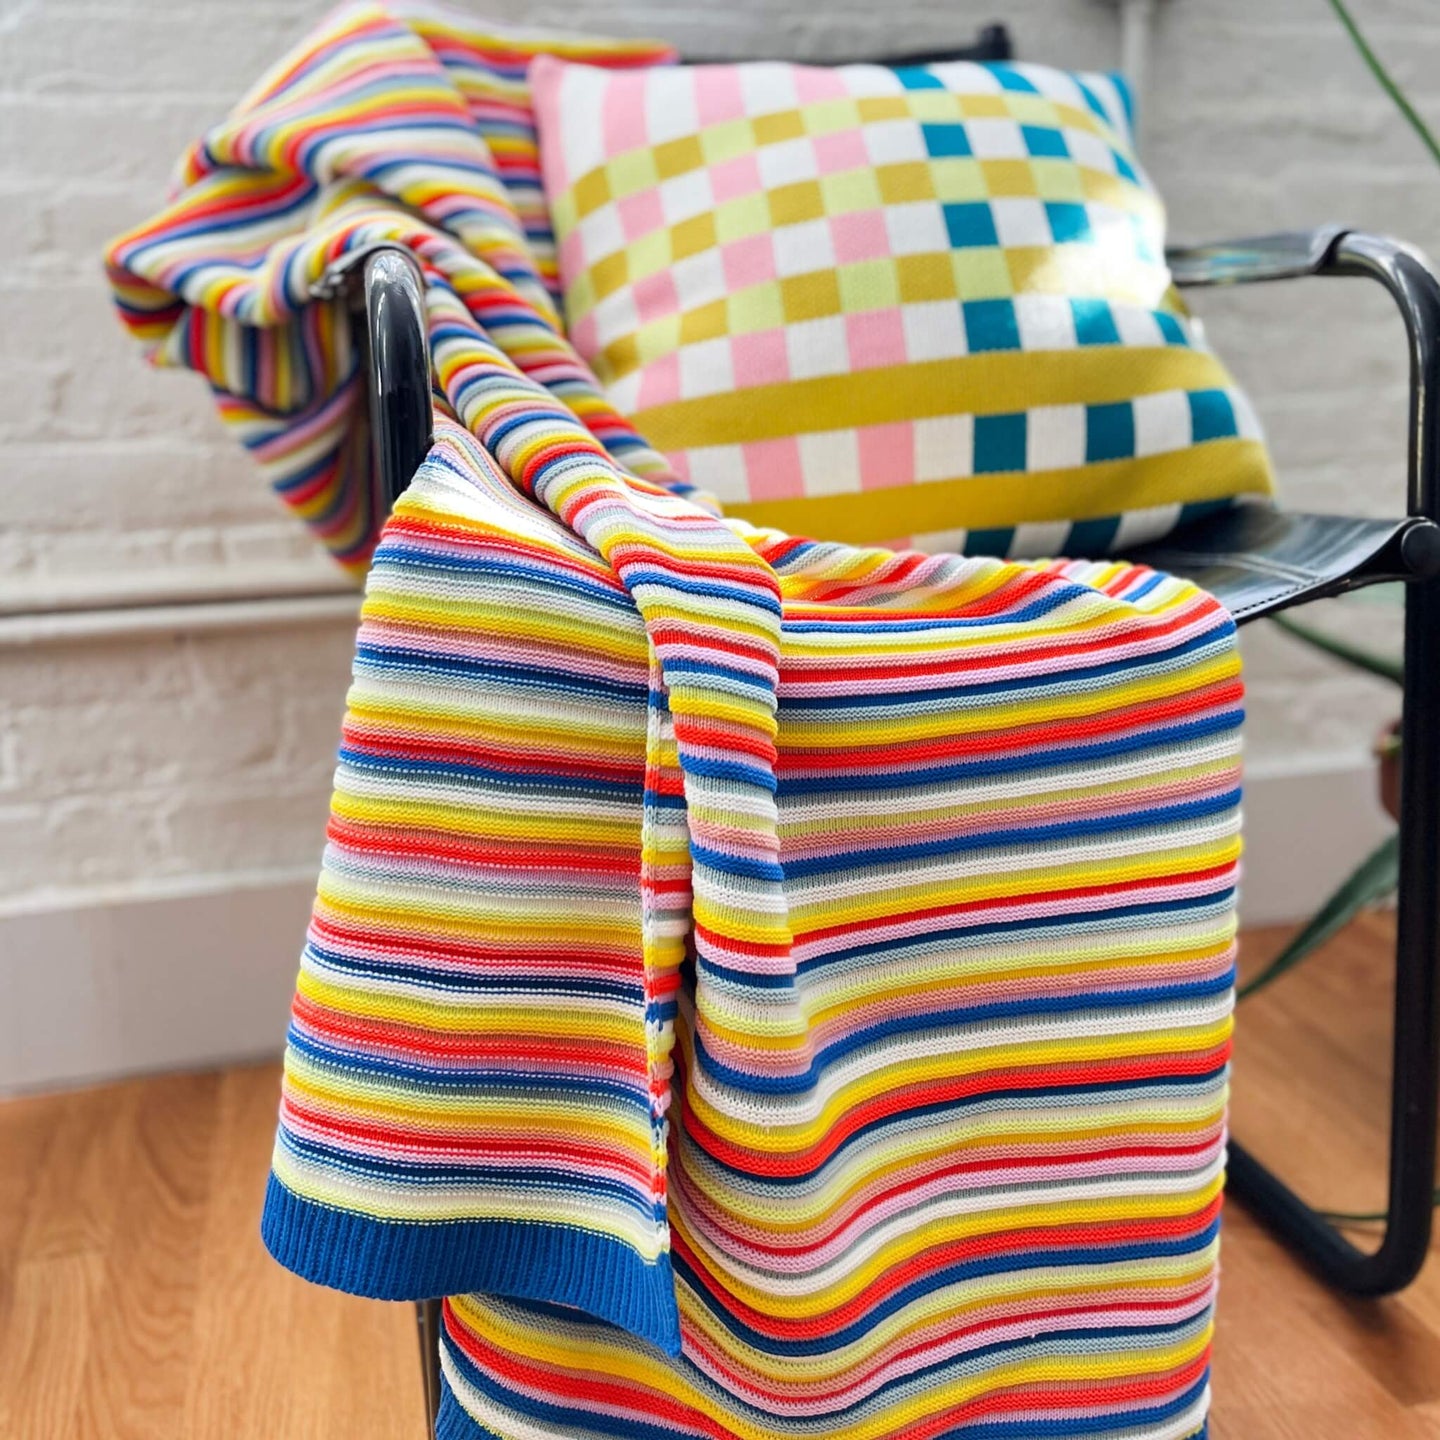 Circus Stripe Texture Multi Color Throw Square Square Knit Pillow Verloop Knits